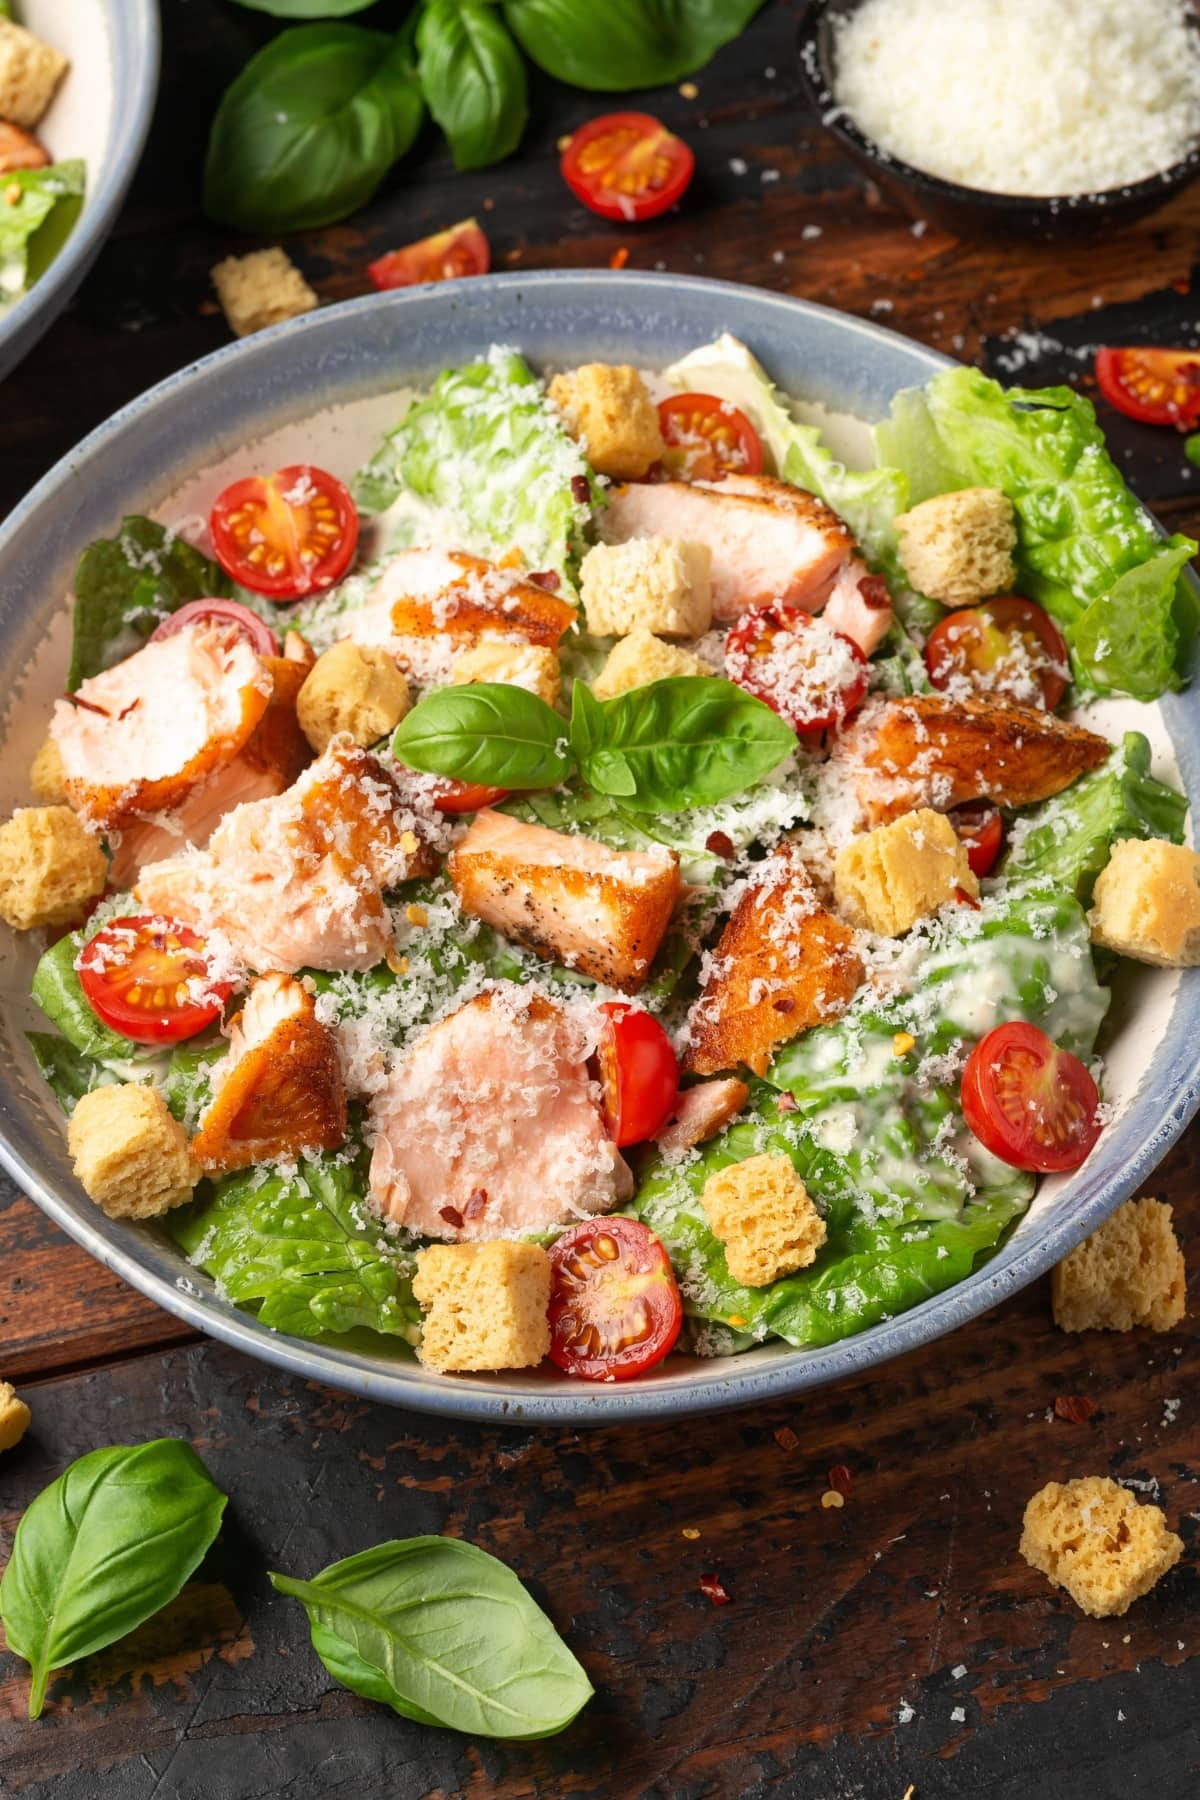 Salmon Caesar Salad with Croutons and Cherry Tomatoes